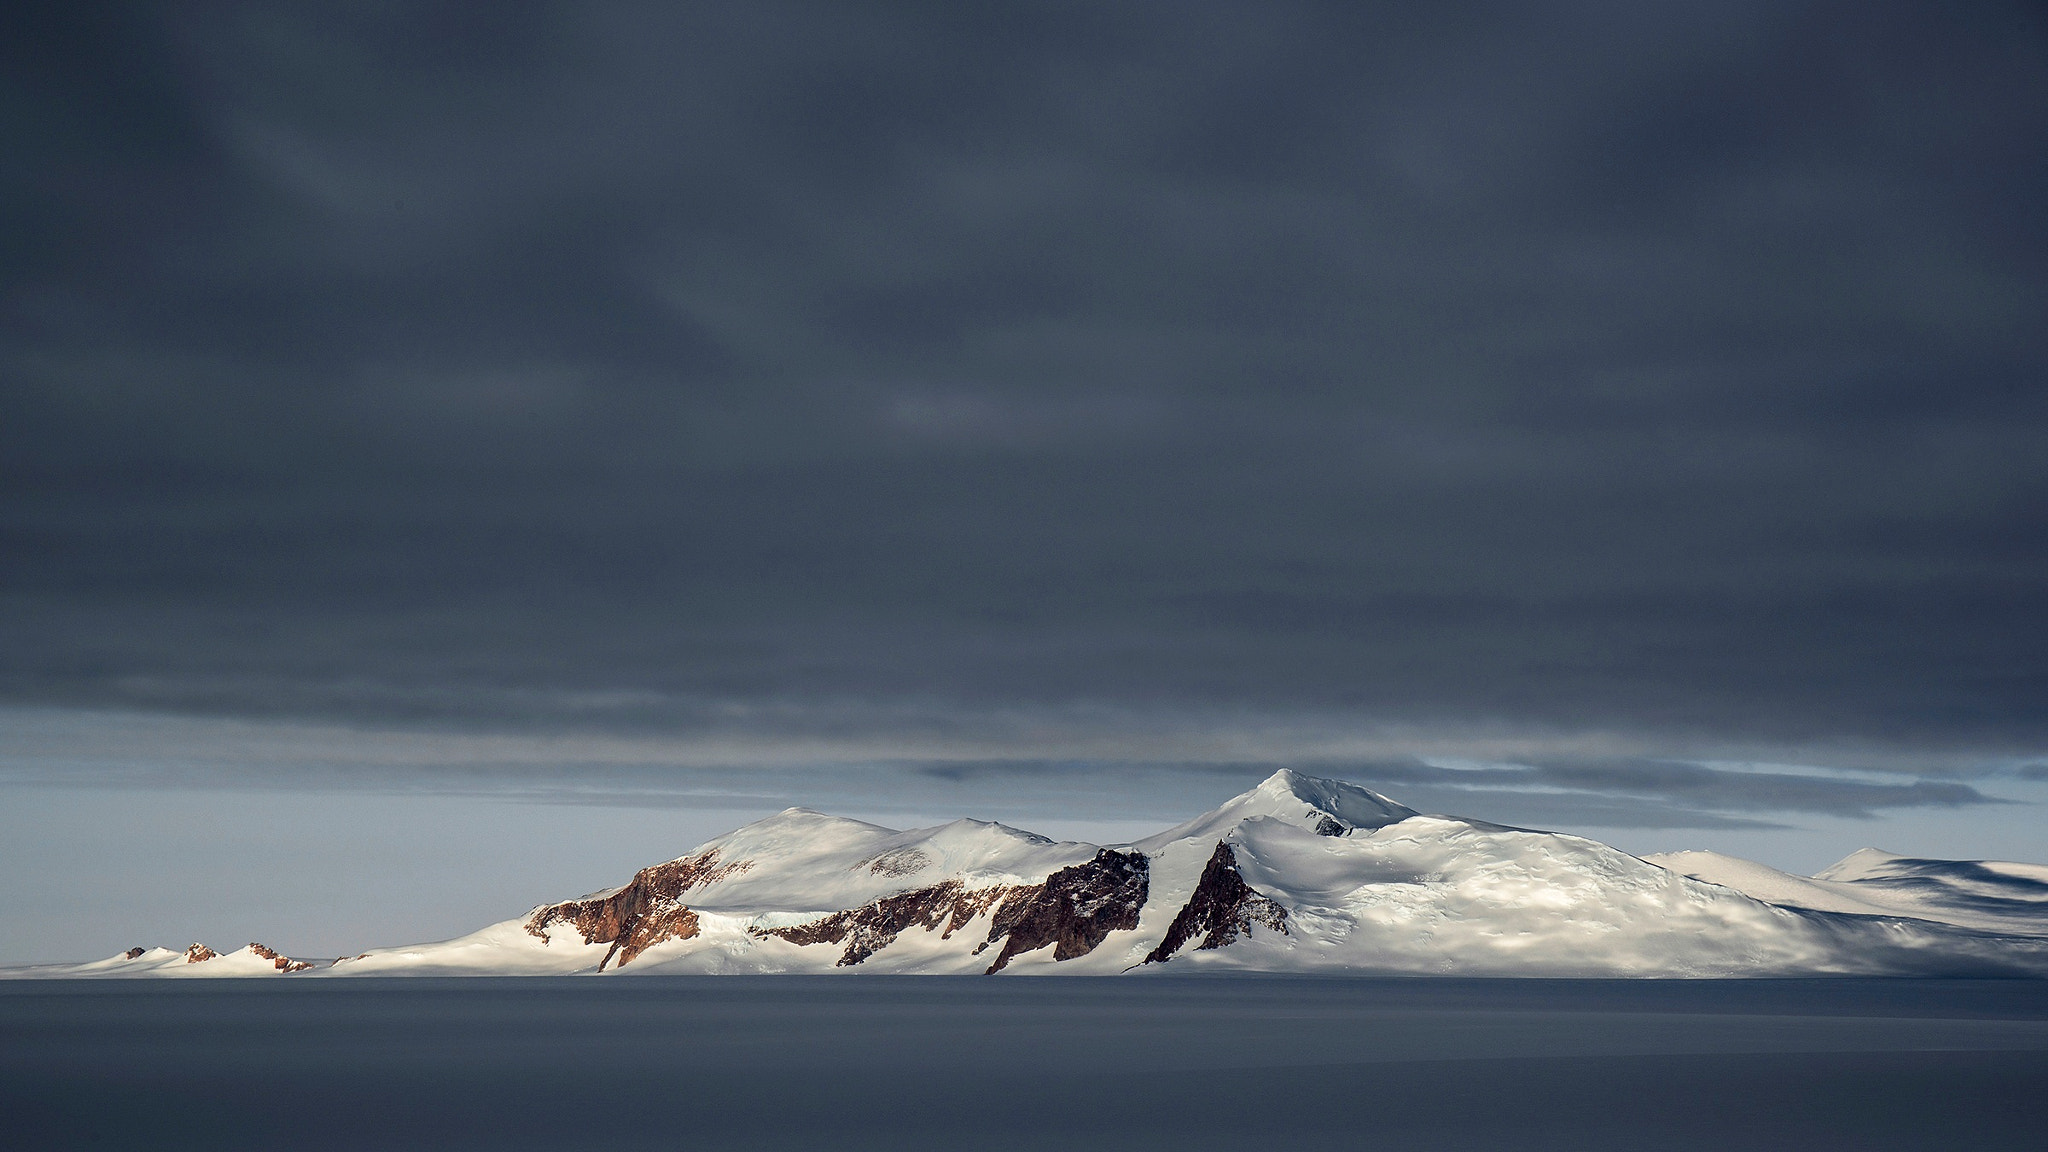 Nikon D800 sample photo. Beautiful whitmore mountains in the west antarctic. antarctica. photography